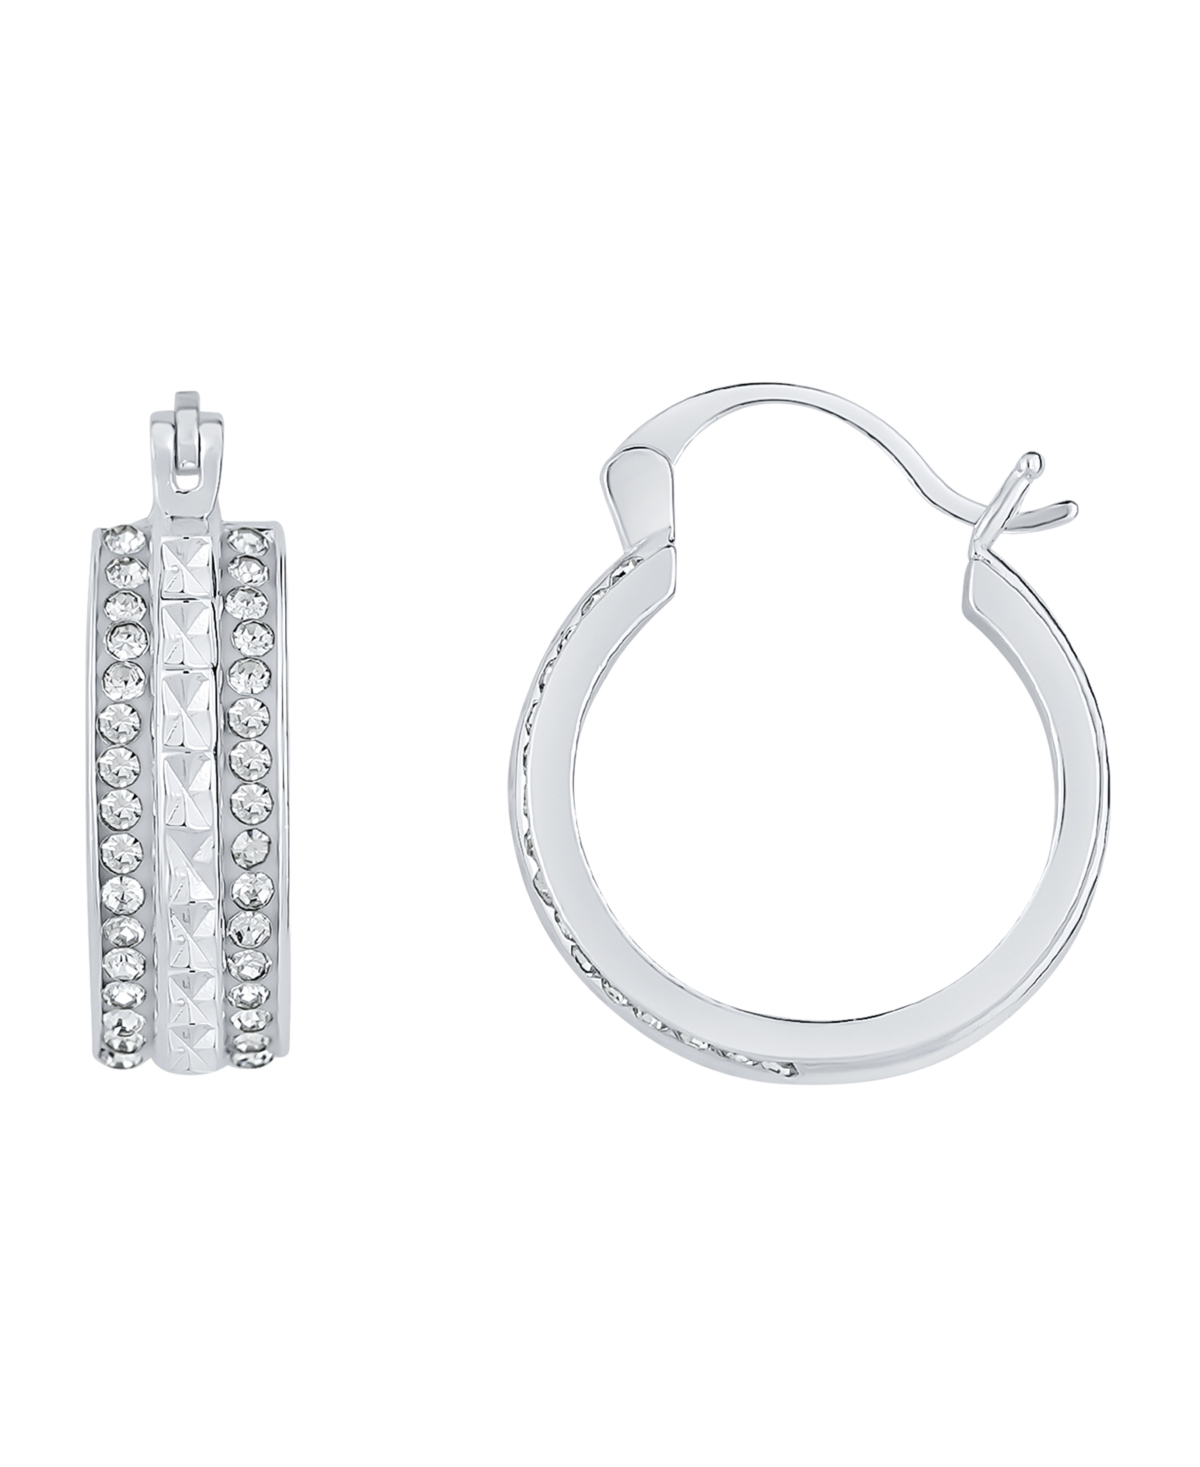 And Now This Crystal Silver Plated Hoop Earring In Silver Plated Brass